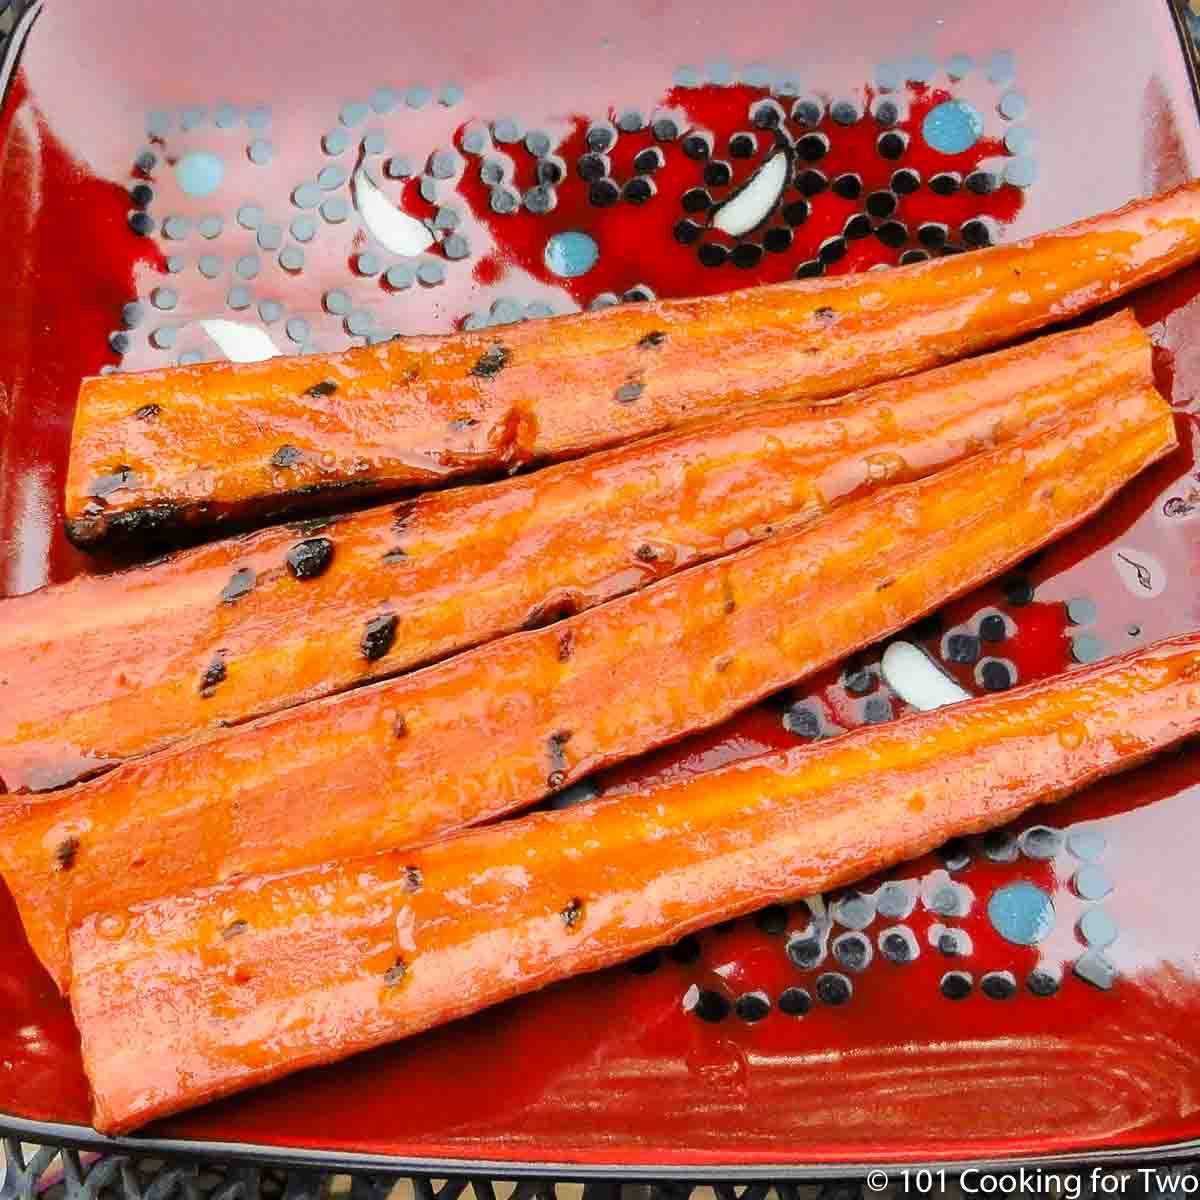 grilled carrots on a red plate.